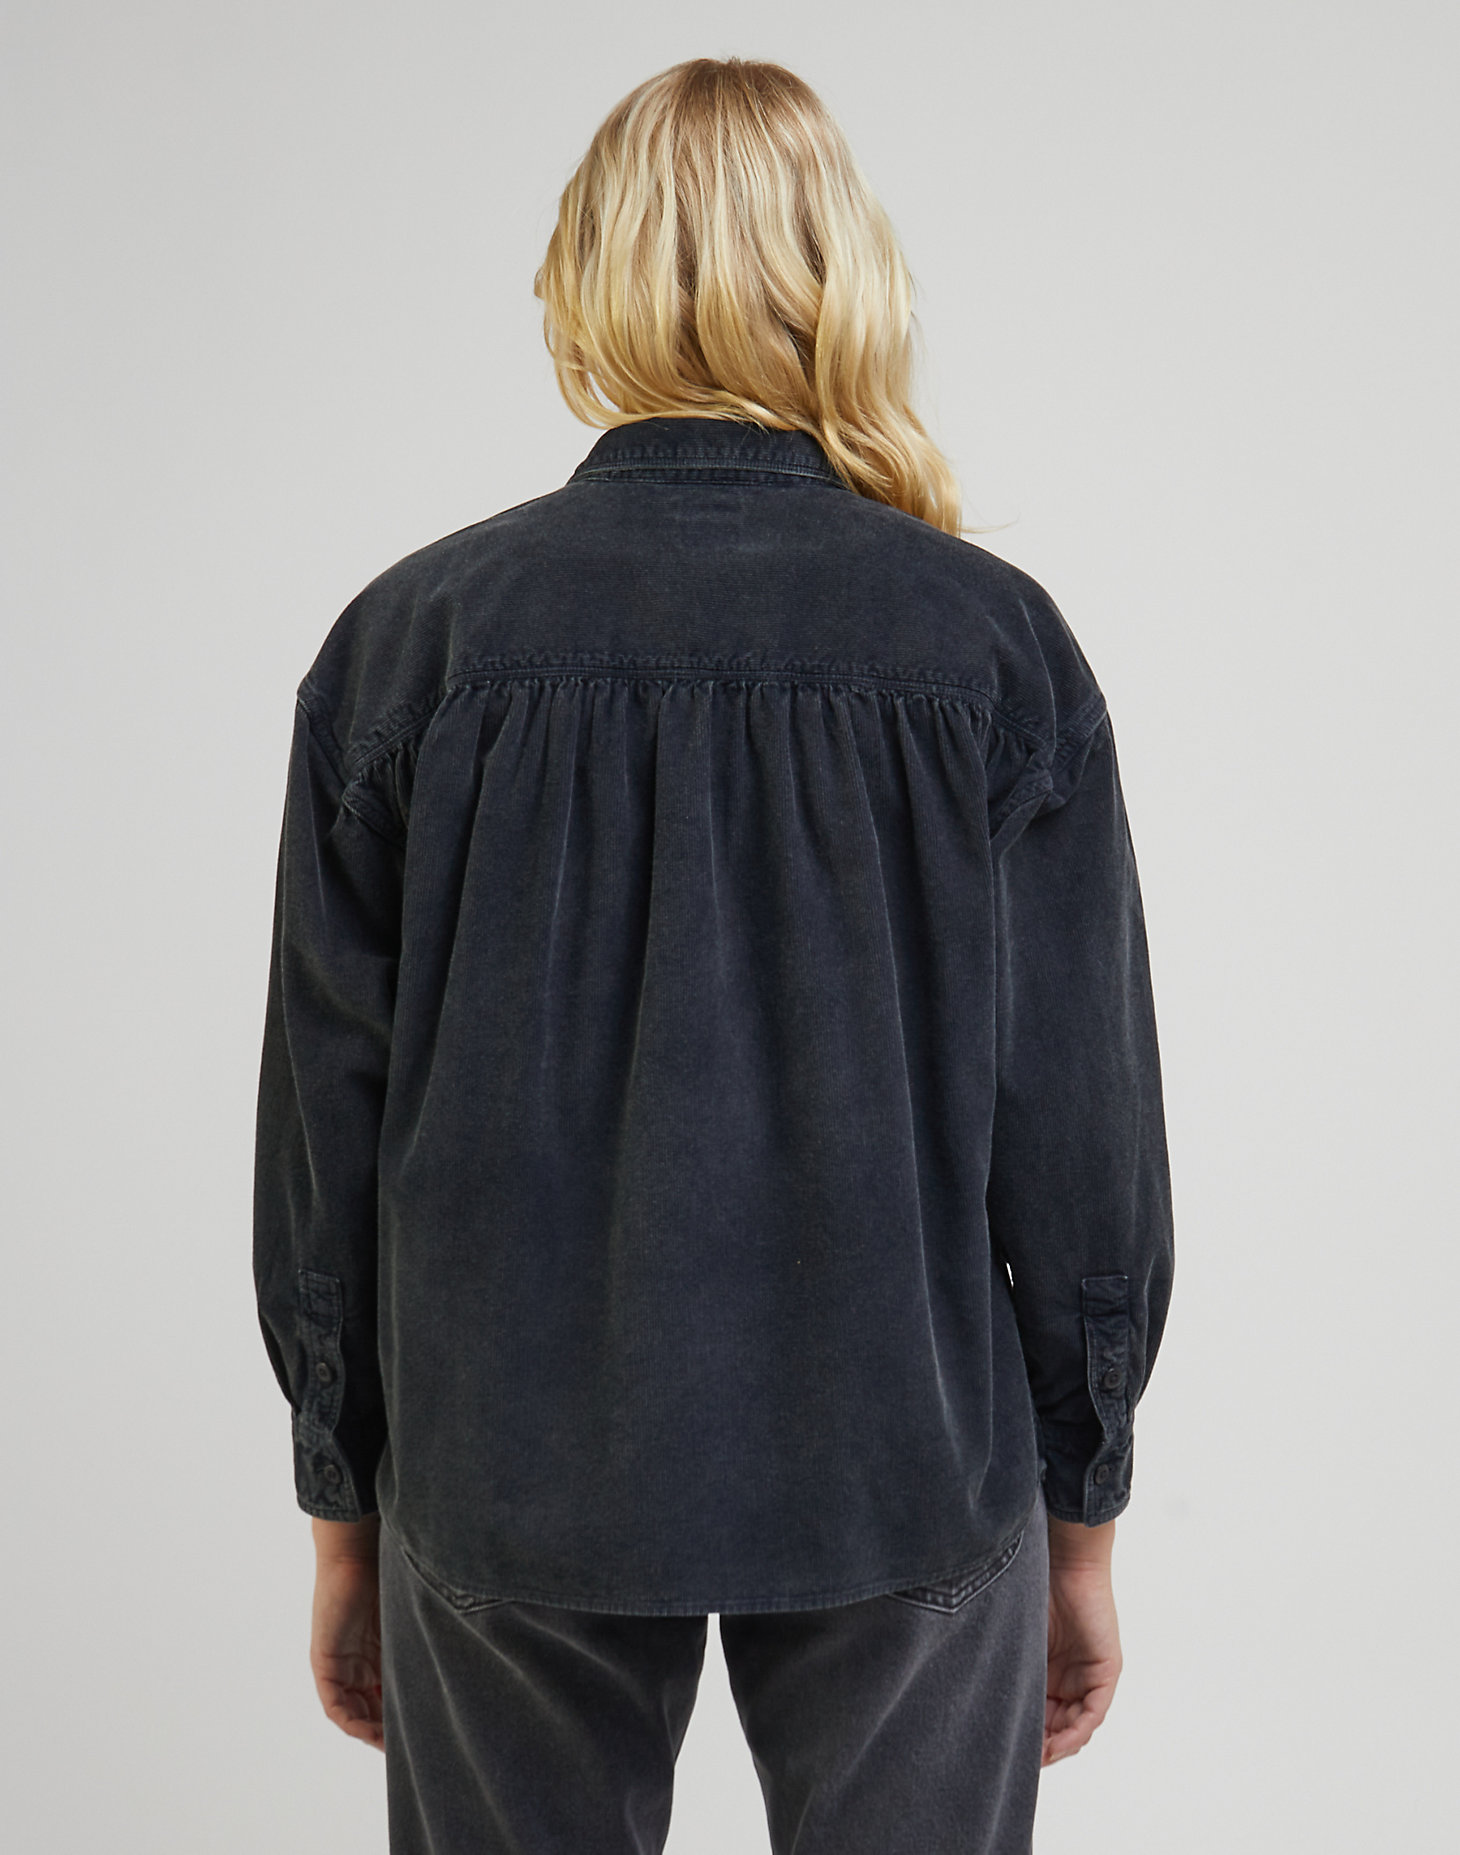 Frontier Shirt in Charcoal alternative view 1